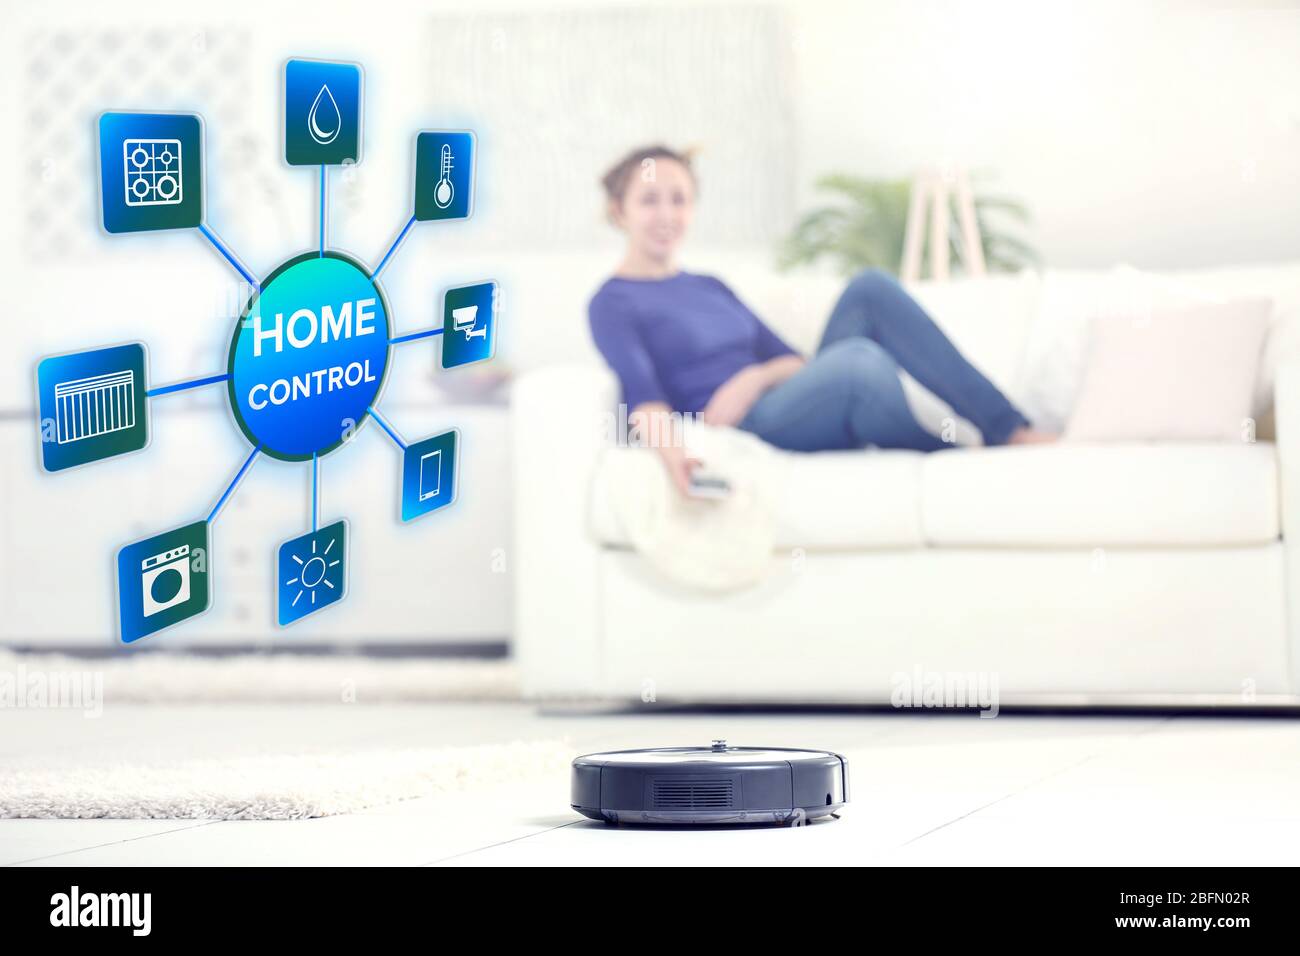 Using smart home app on phone. Smart home control concept. Stock Photo